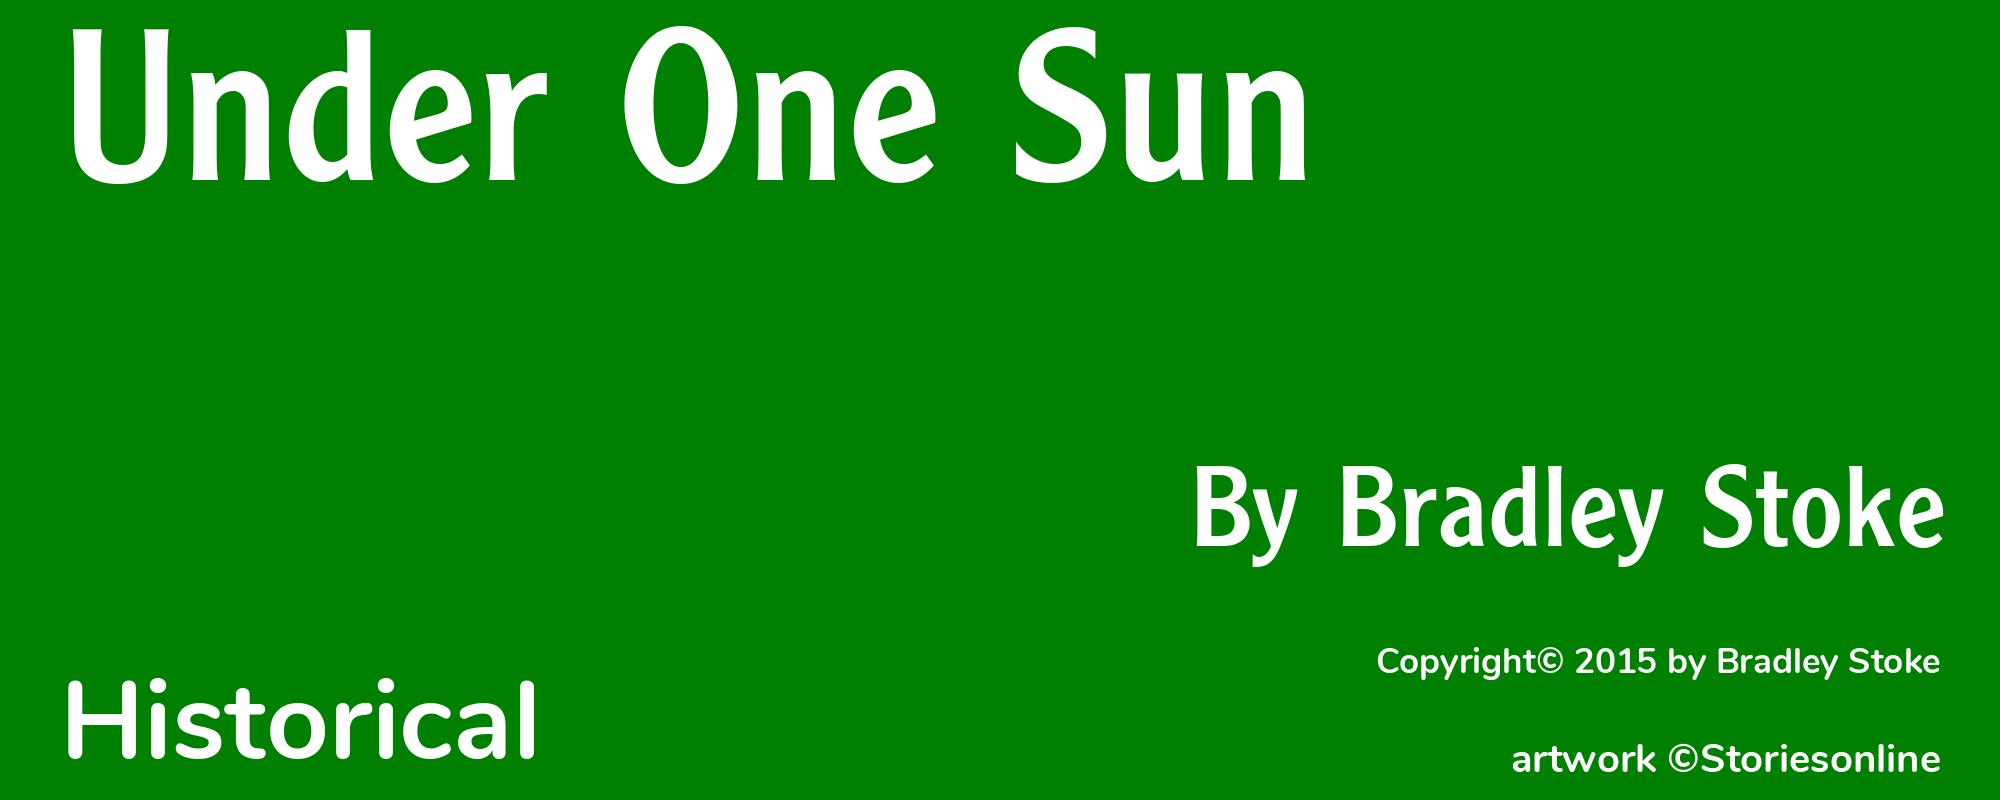 Under One Sun - Cover